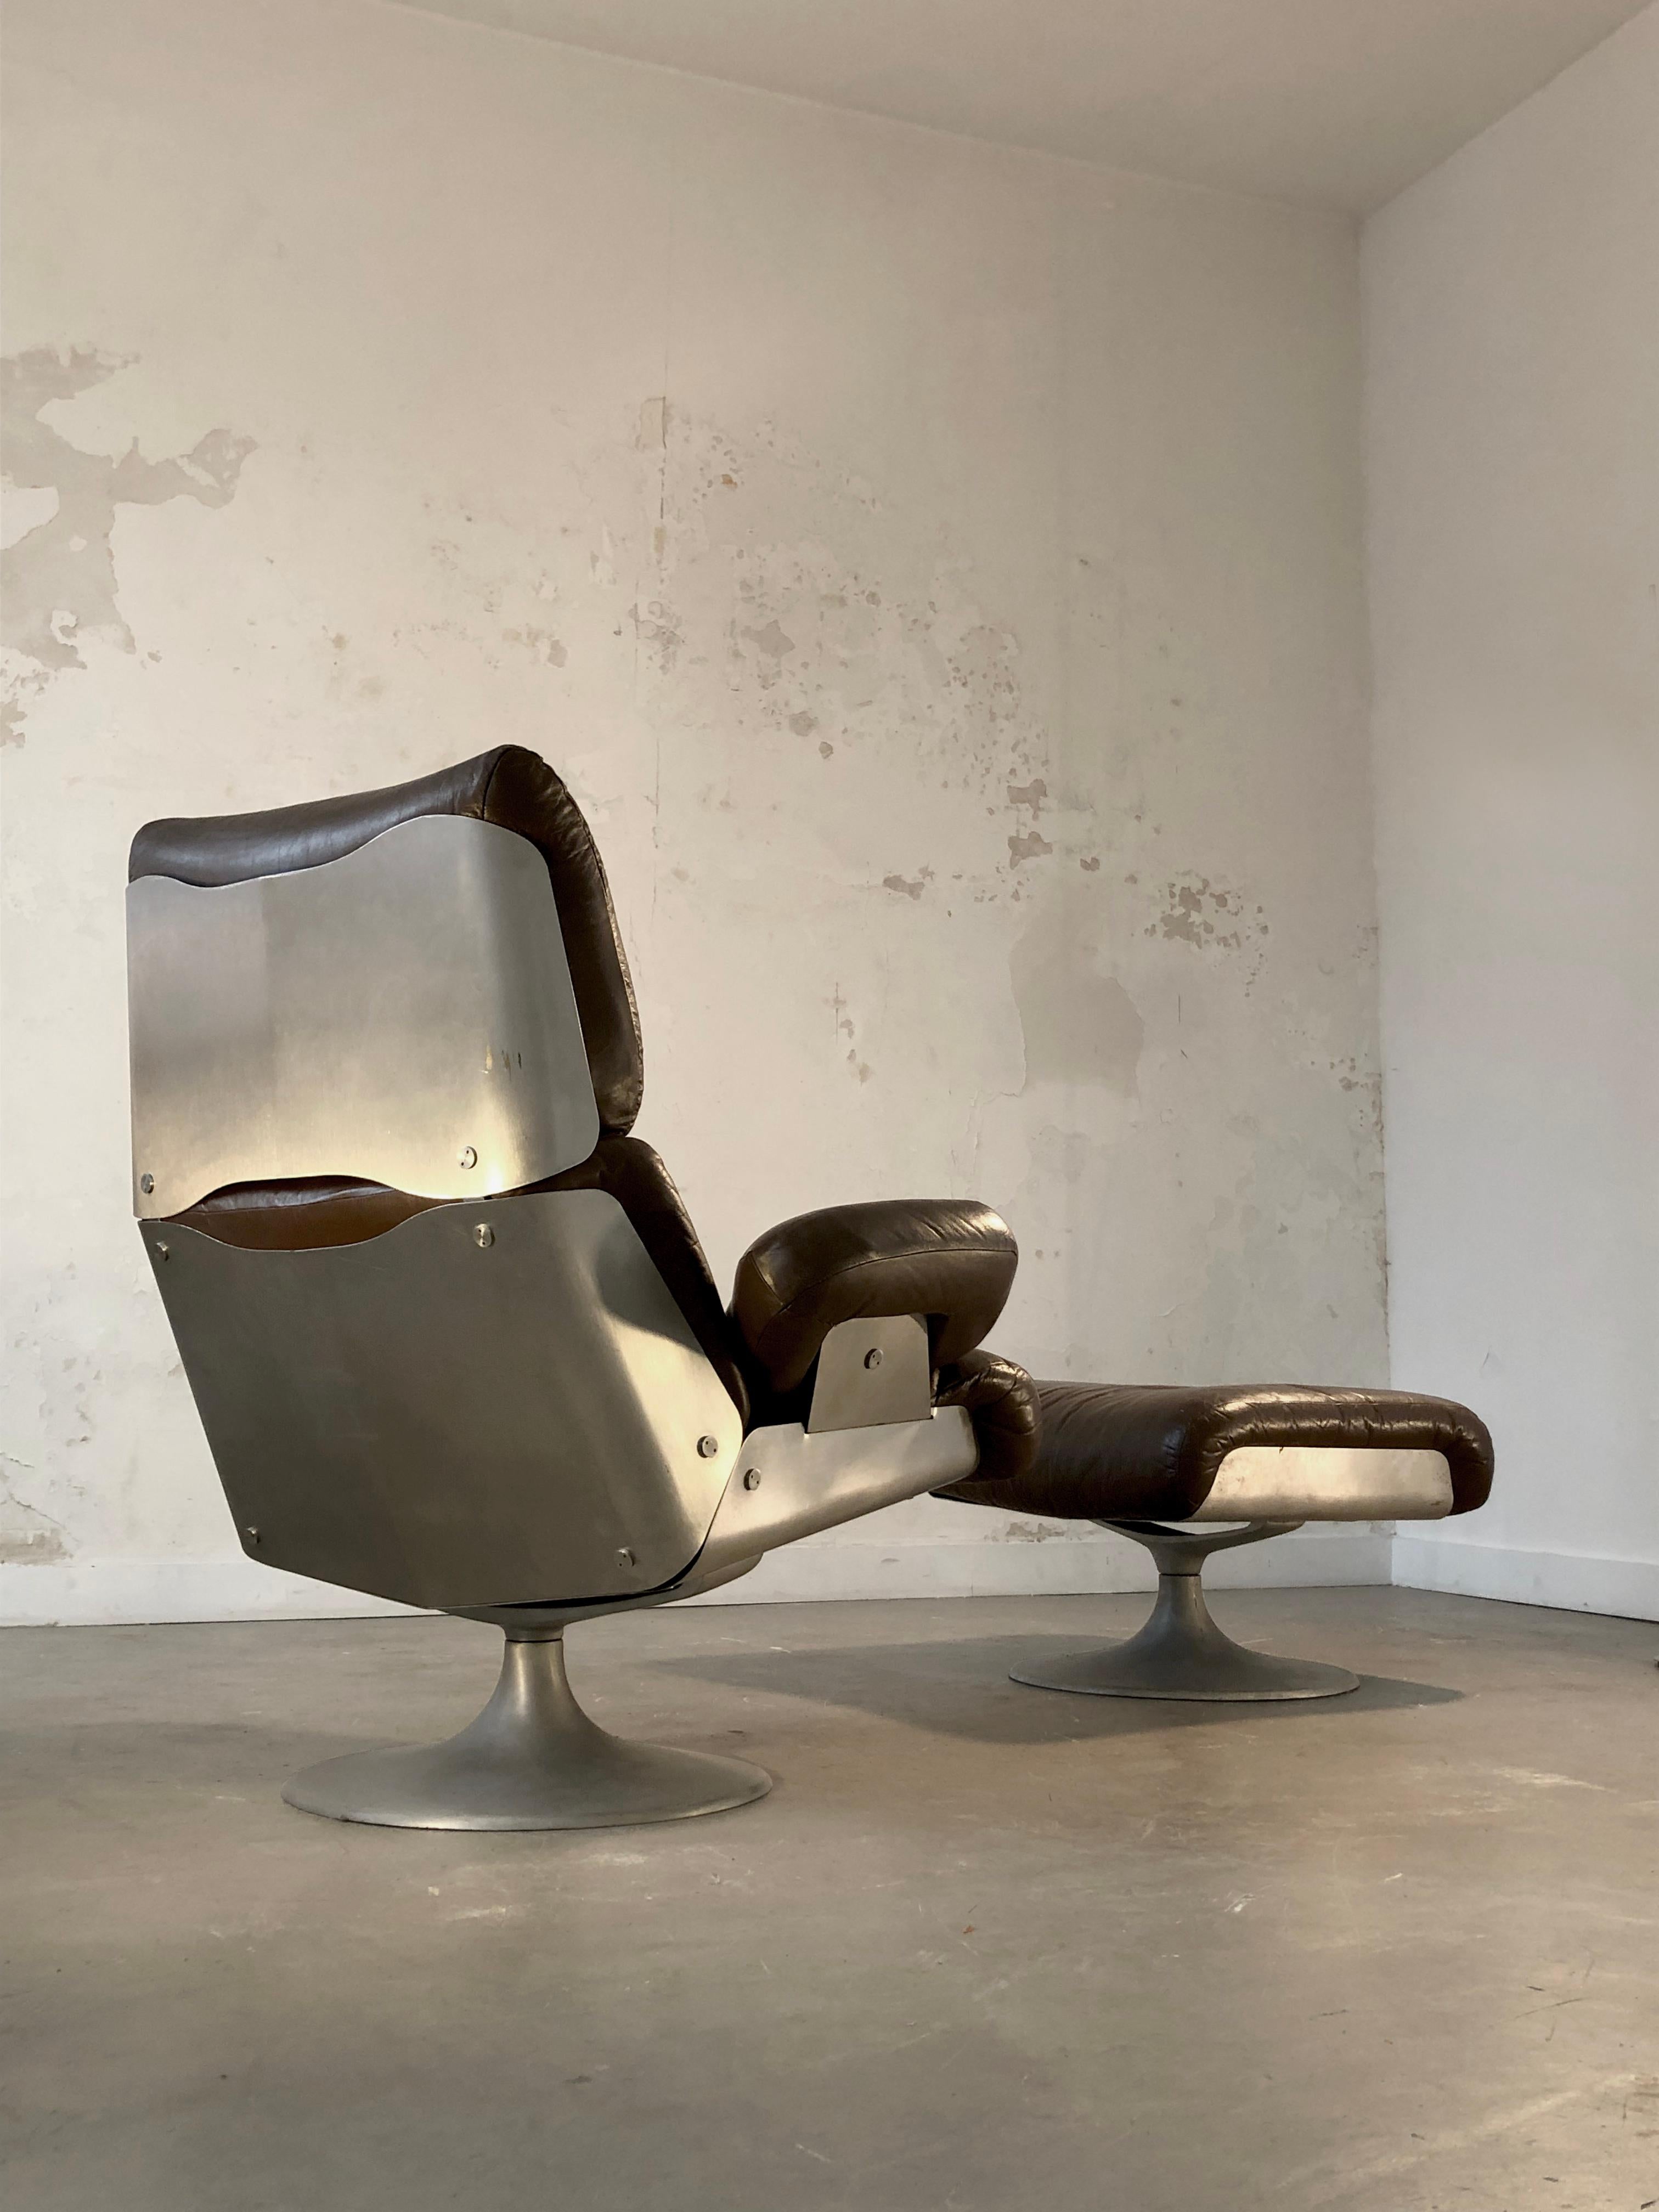 Space Age A RADICAL POST-MODERN ARMCHAIR LOUNGE CHAIR & OTTOMAN By XAVIER FEAL France 1970 For Sale